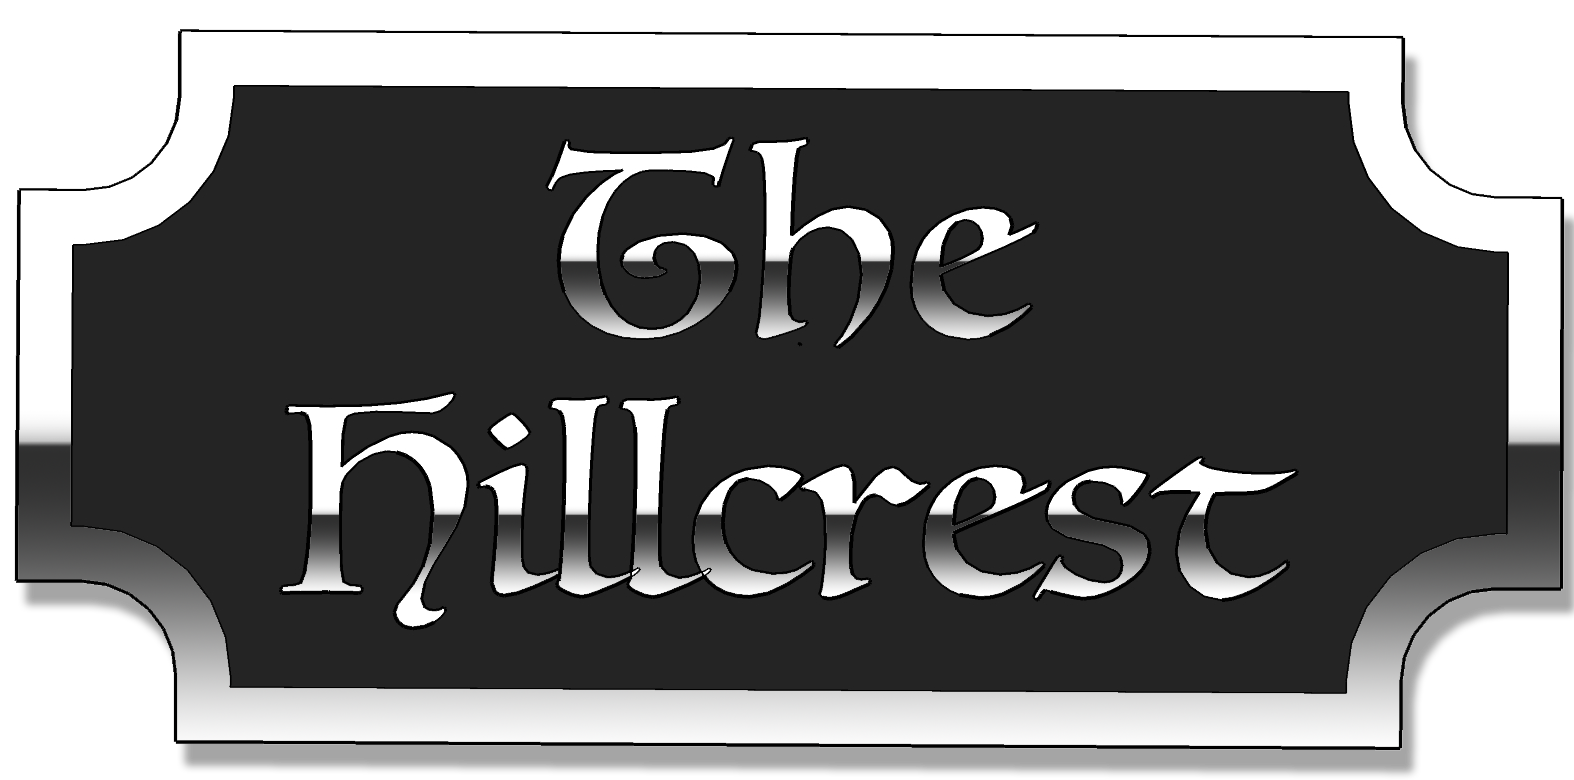 The Hillcrest